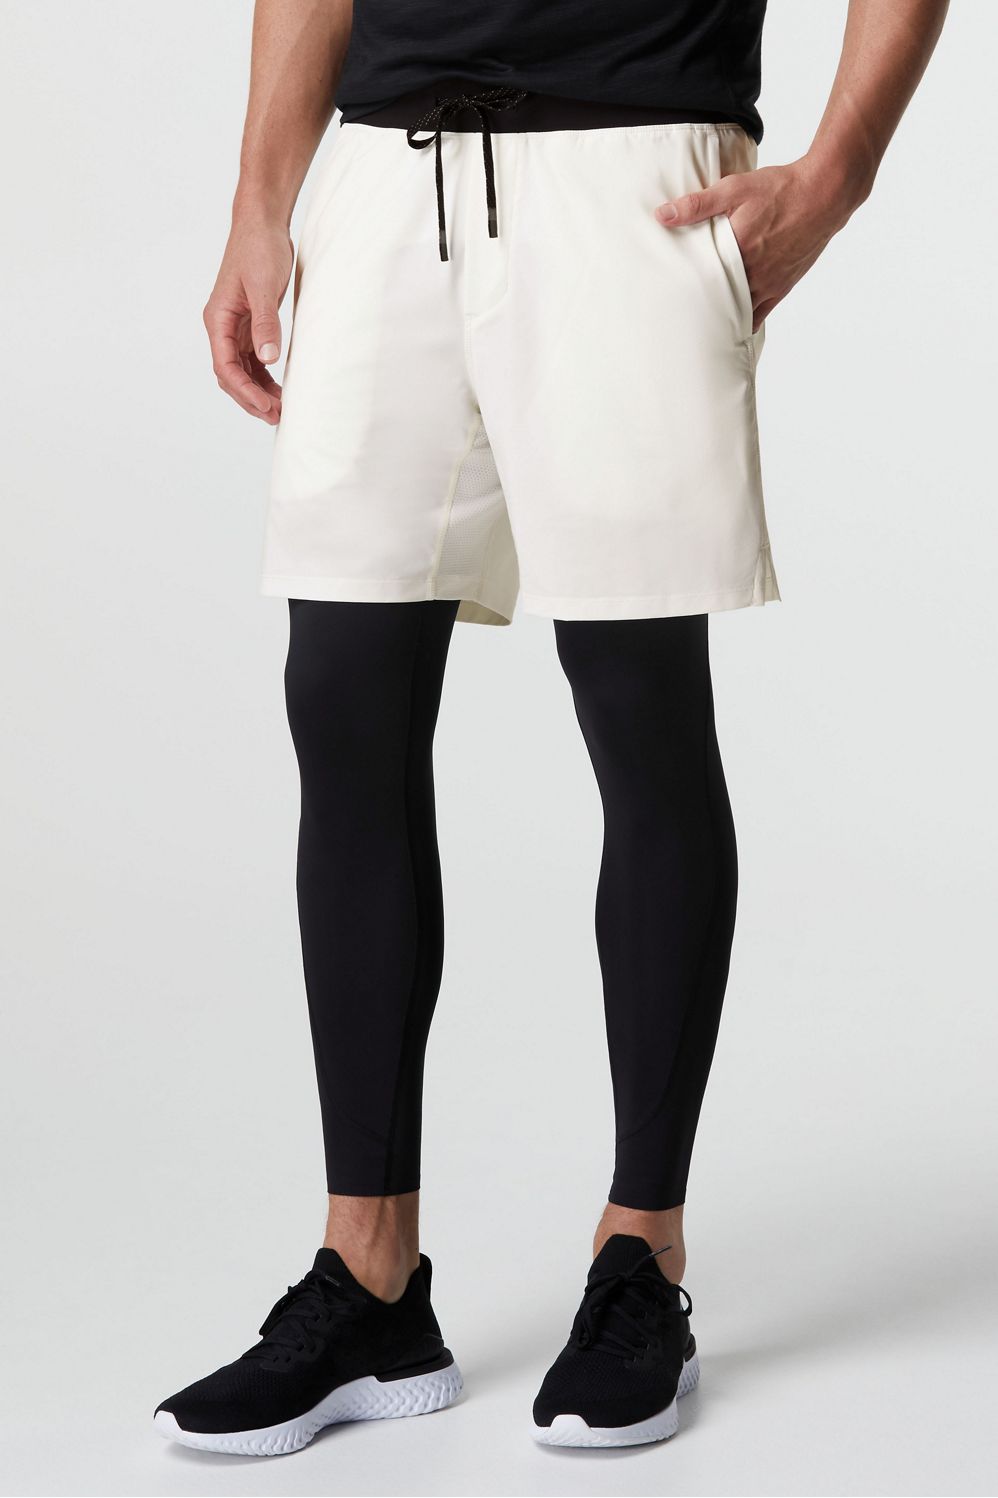 Pinecrest ::: FABLETICS MADNESS — LIMITED TIME ONLY $19 ELITE SHORTS :::  Fabletics